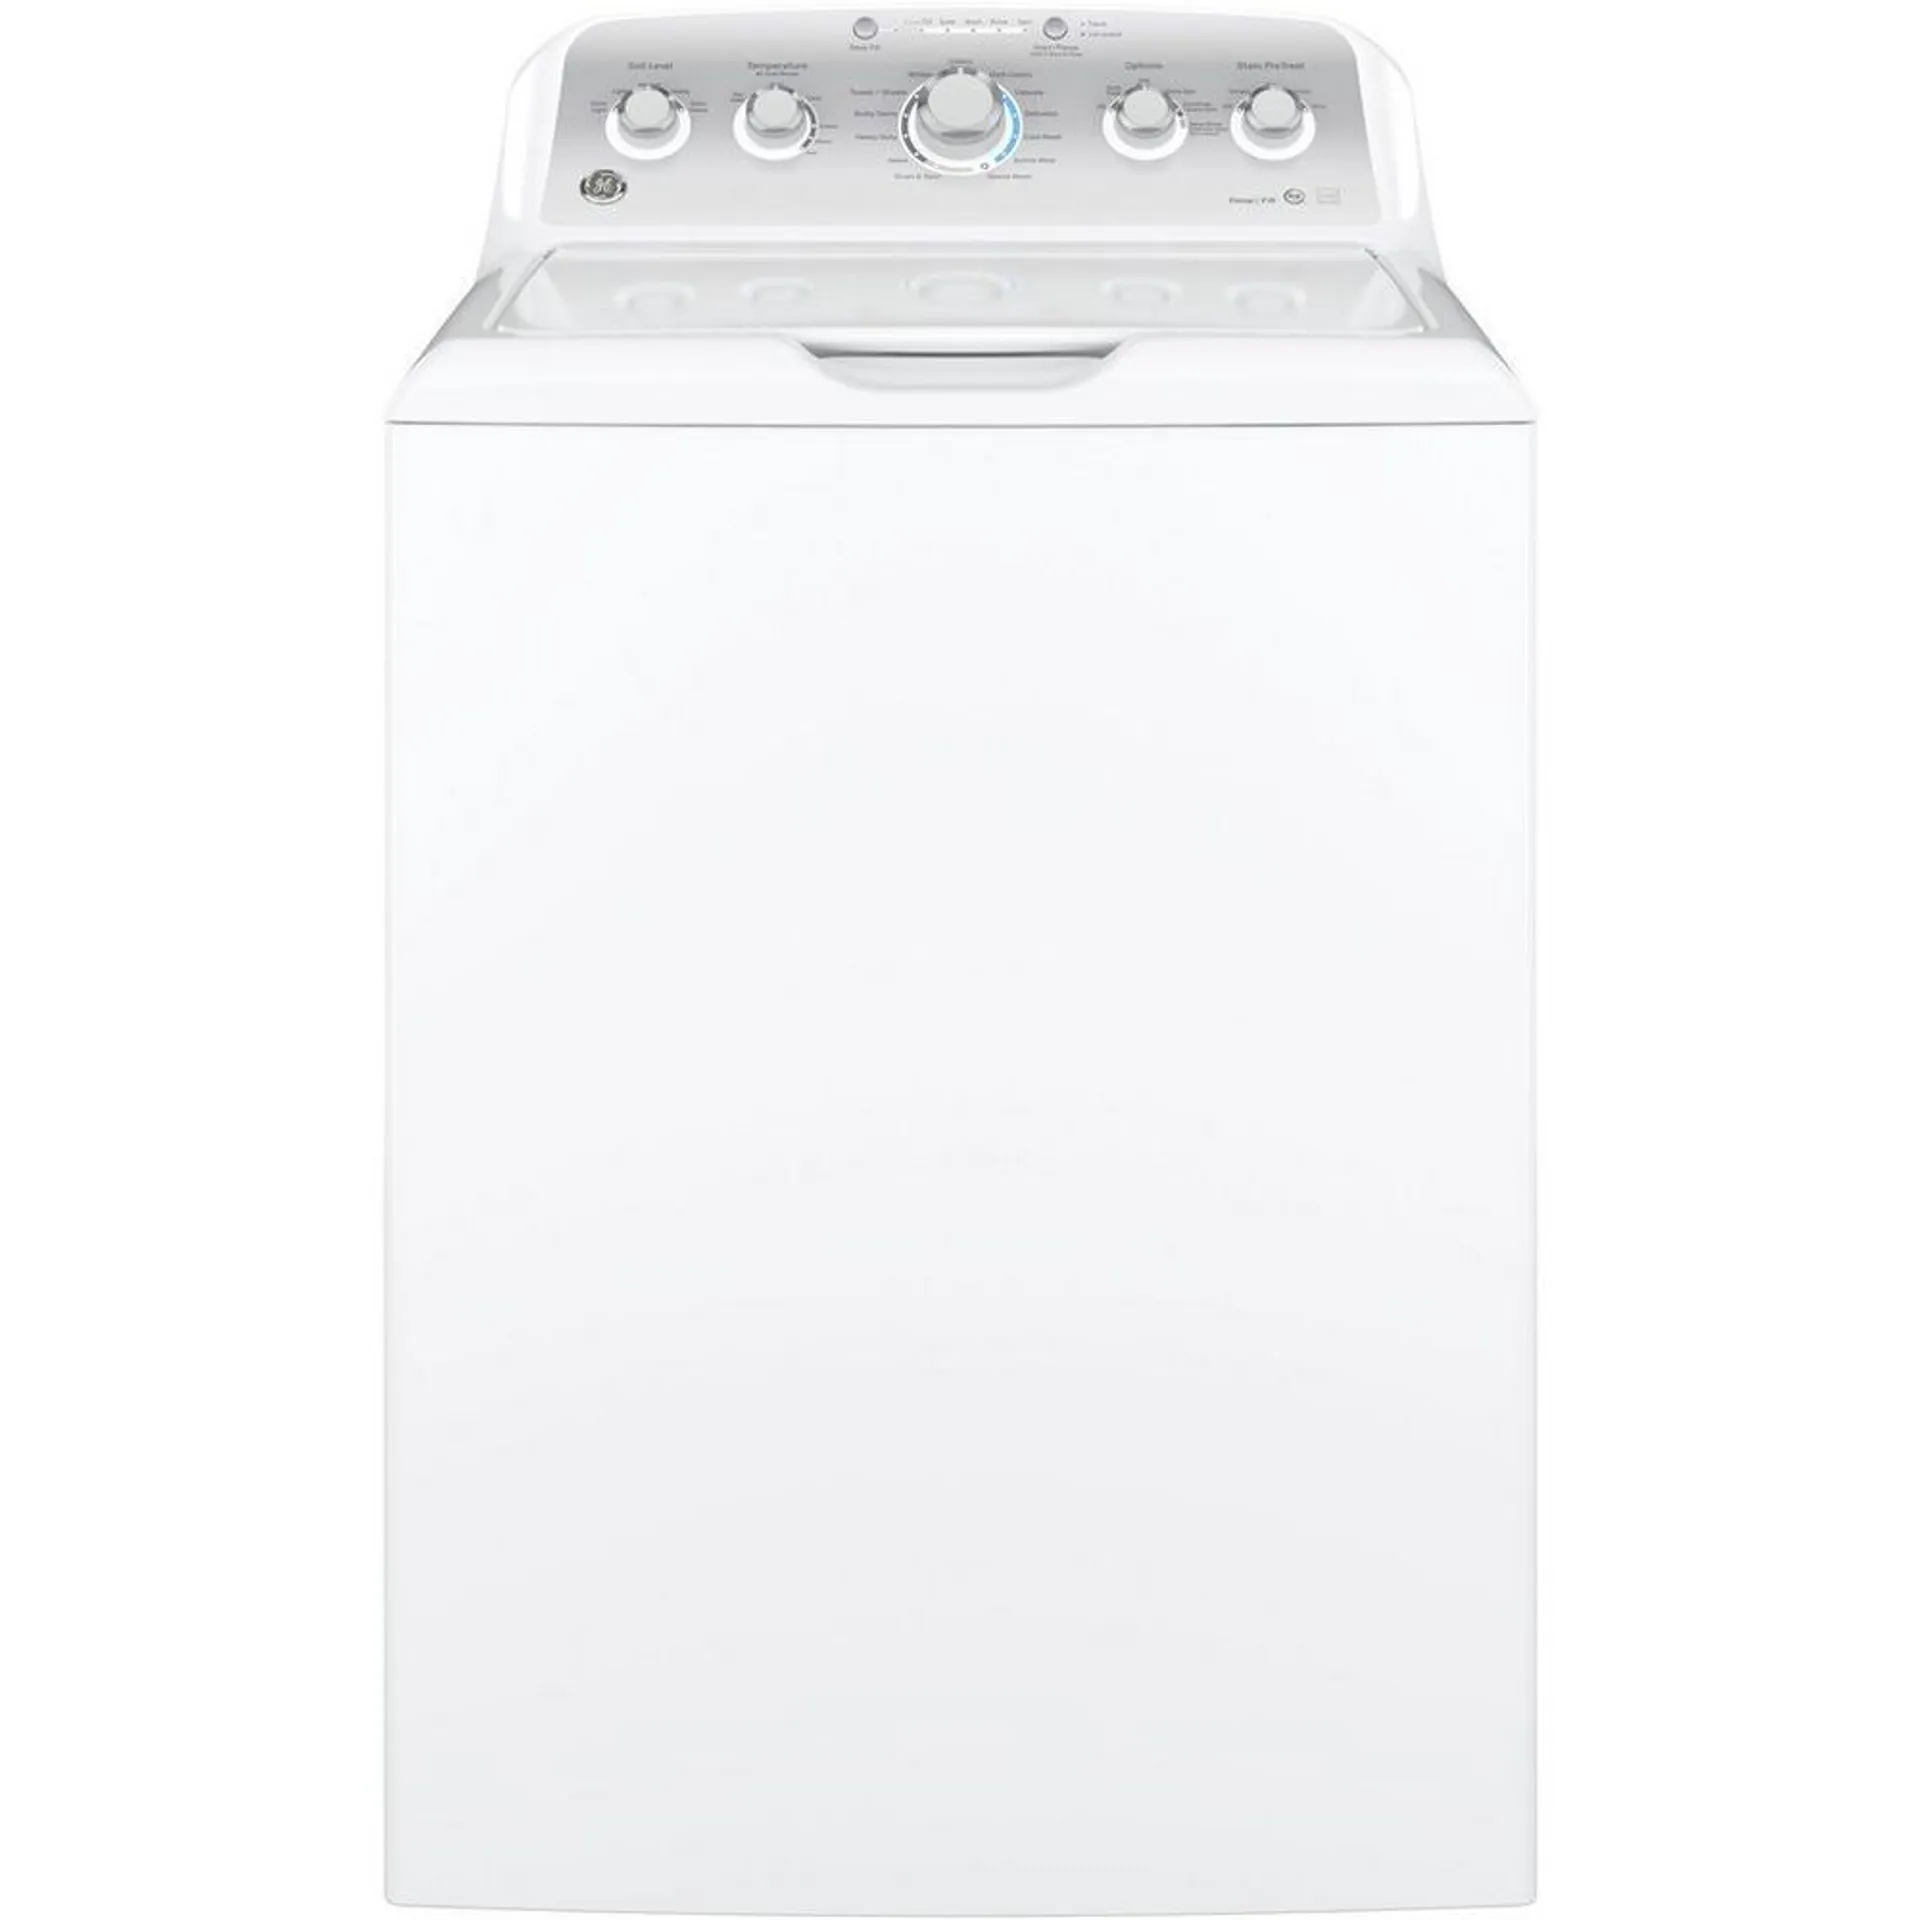 4.4 cu. ft. HE Top Load Washer Only